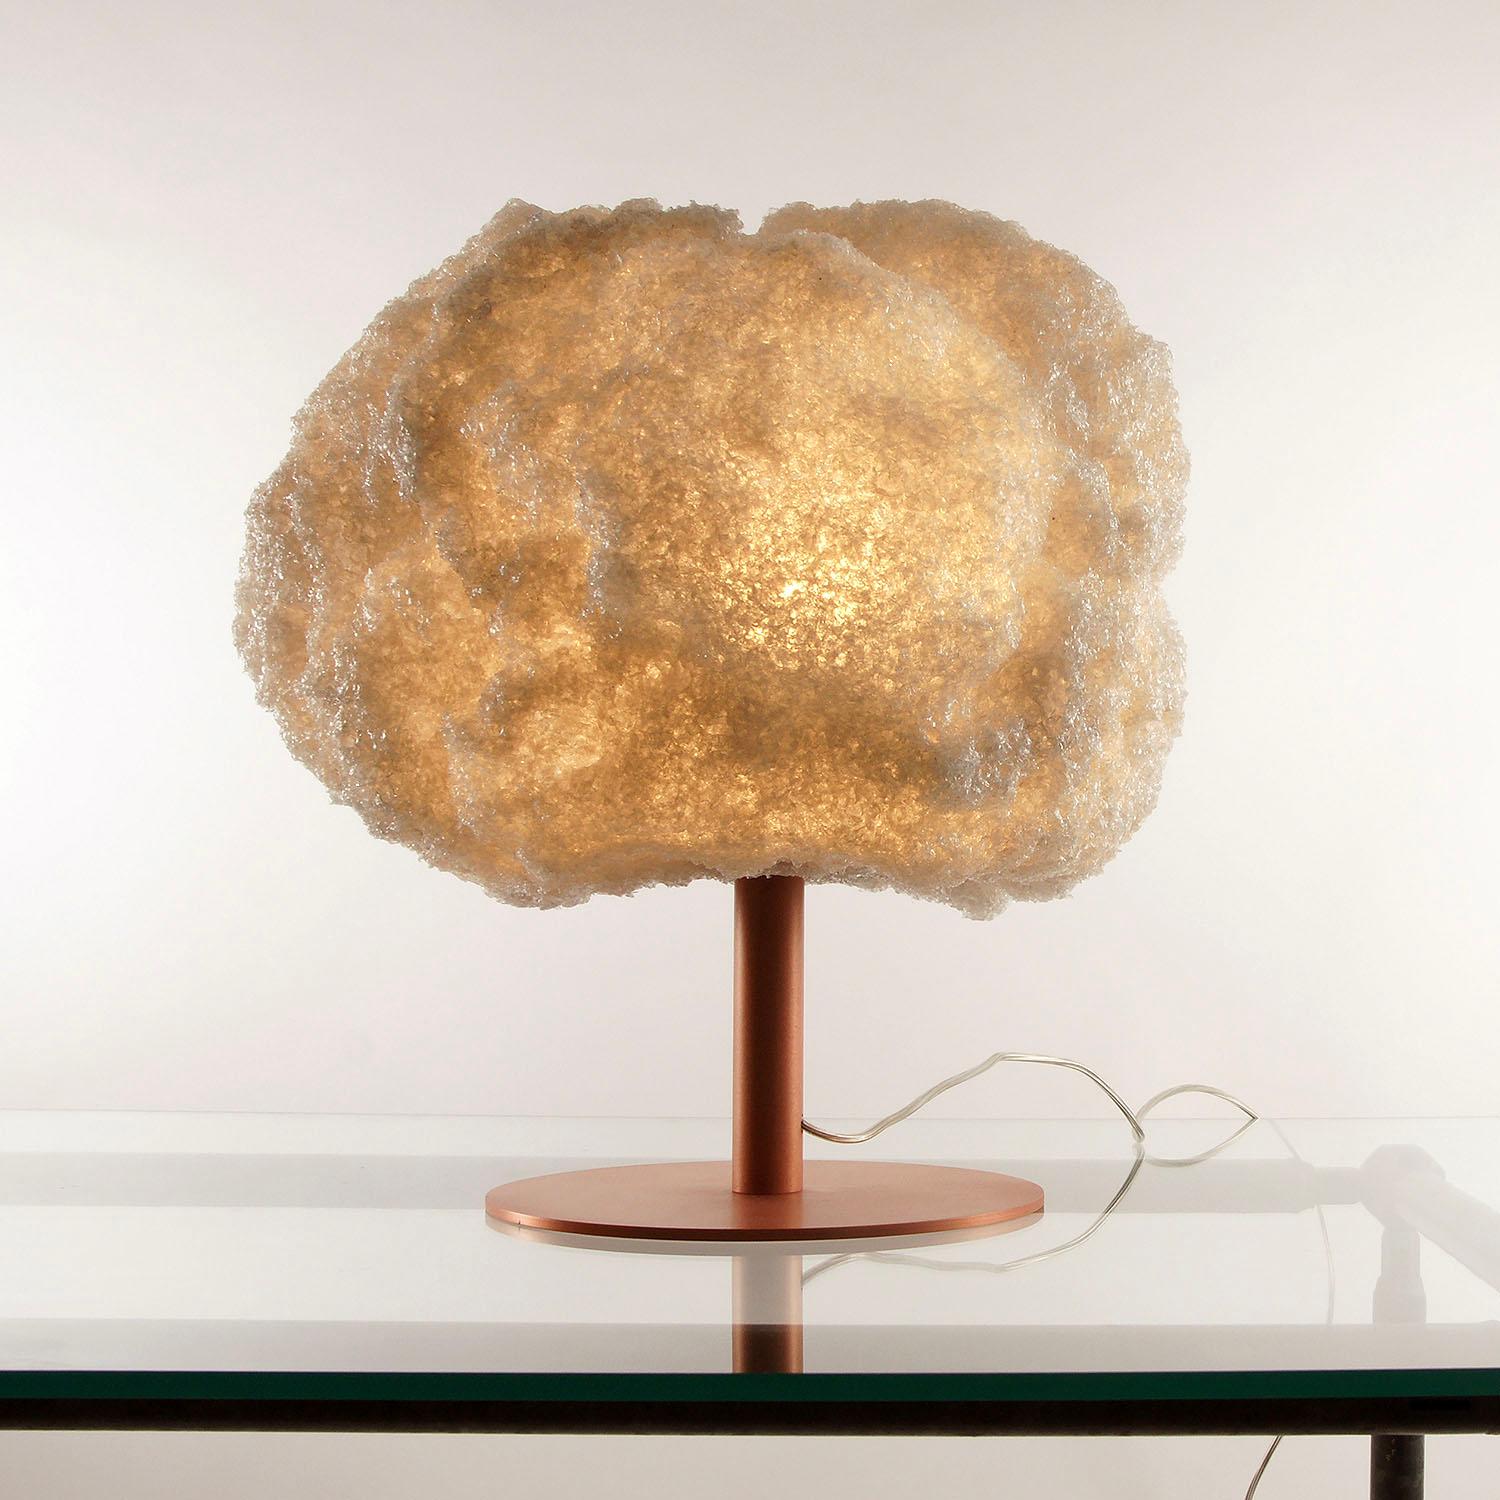 German Contemporary Off-White Table Lamp, Storm Light Copper by Johannes Hemann For Sale